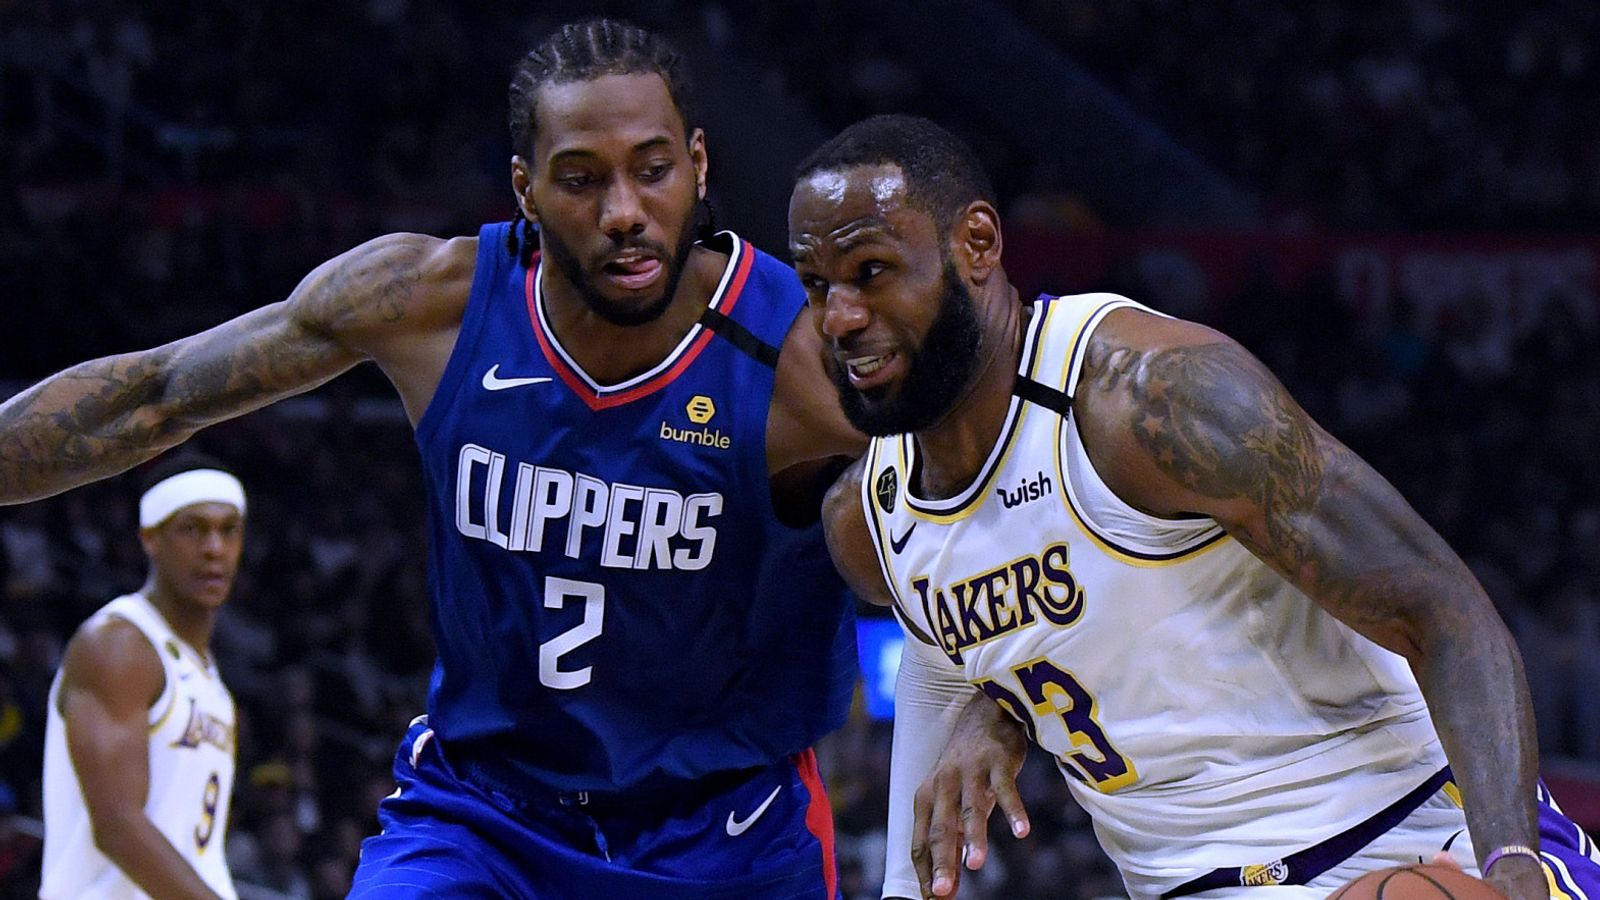 NBA restart talking points: Have your say on Andy Brassell's top storylines to follow - Sky Sports